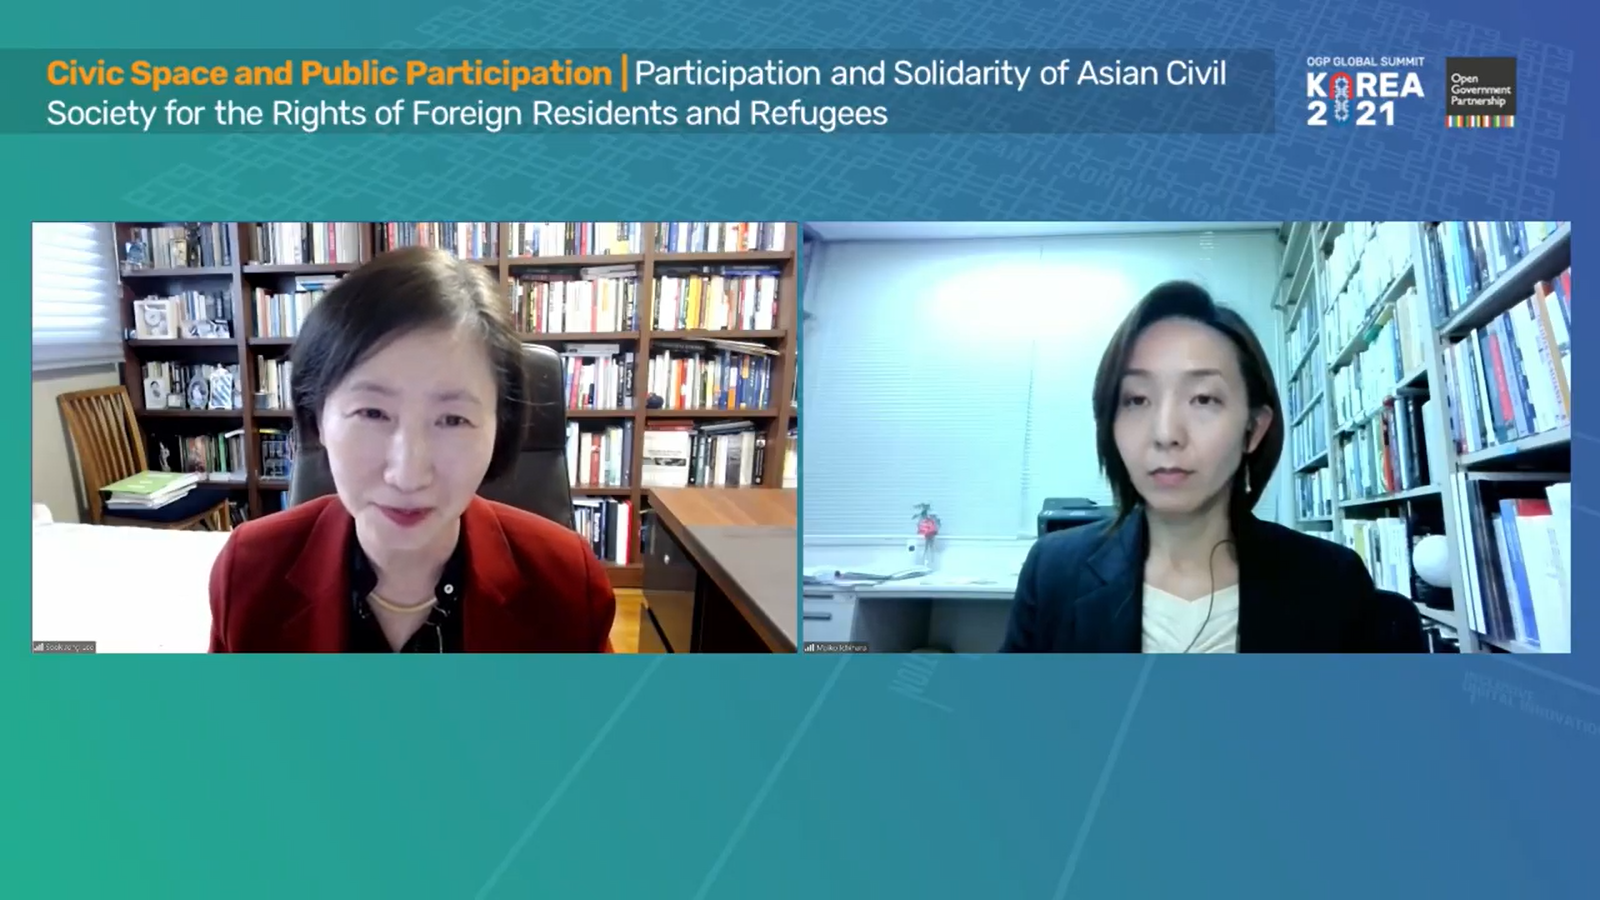 2021 OGP Global Summit: Participation and Solidarity of Asian Civil Society for the Rights of Foreign Residents and Refugees